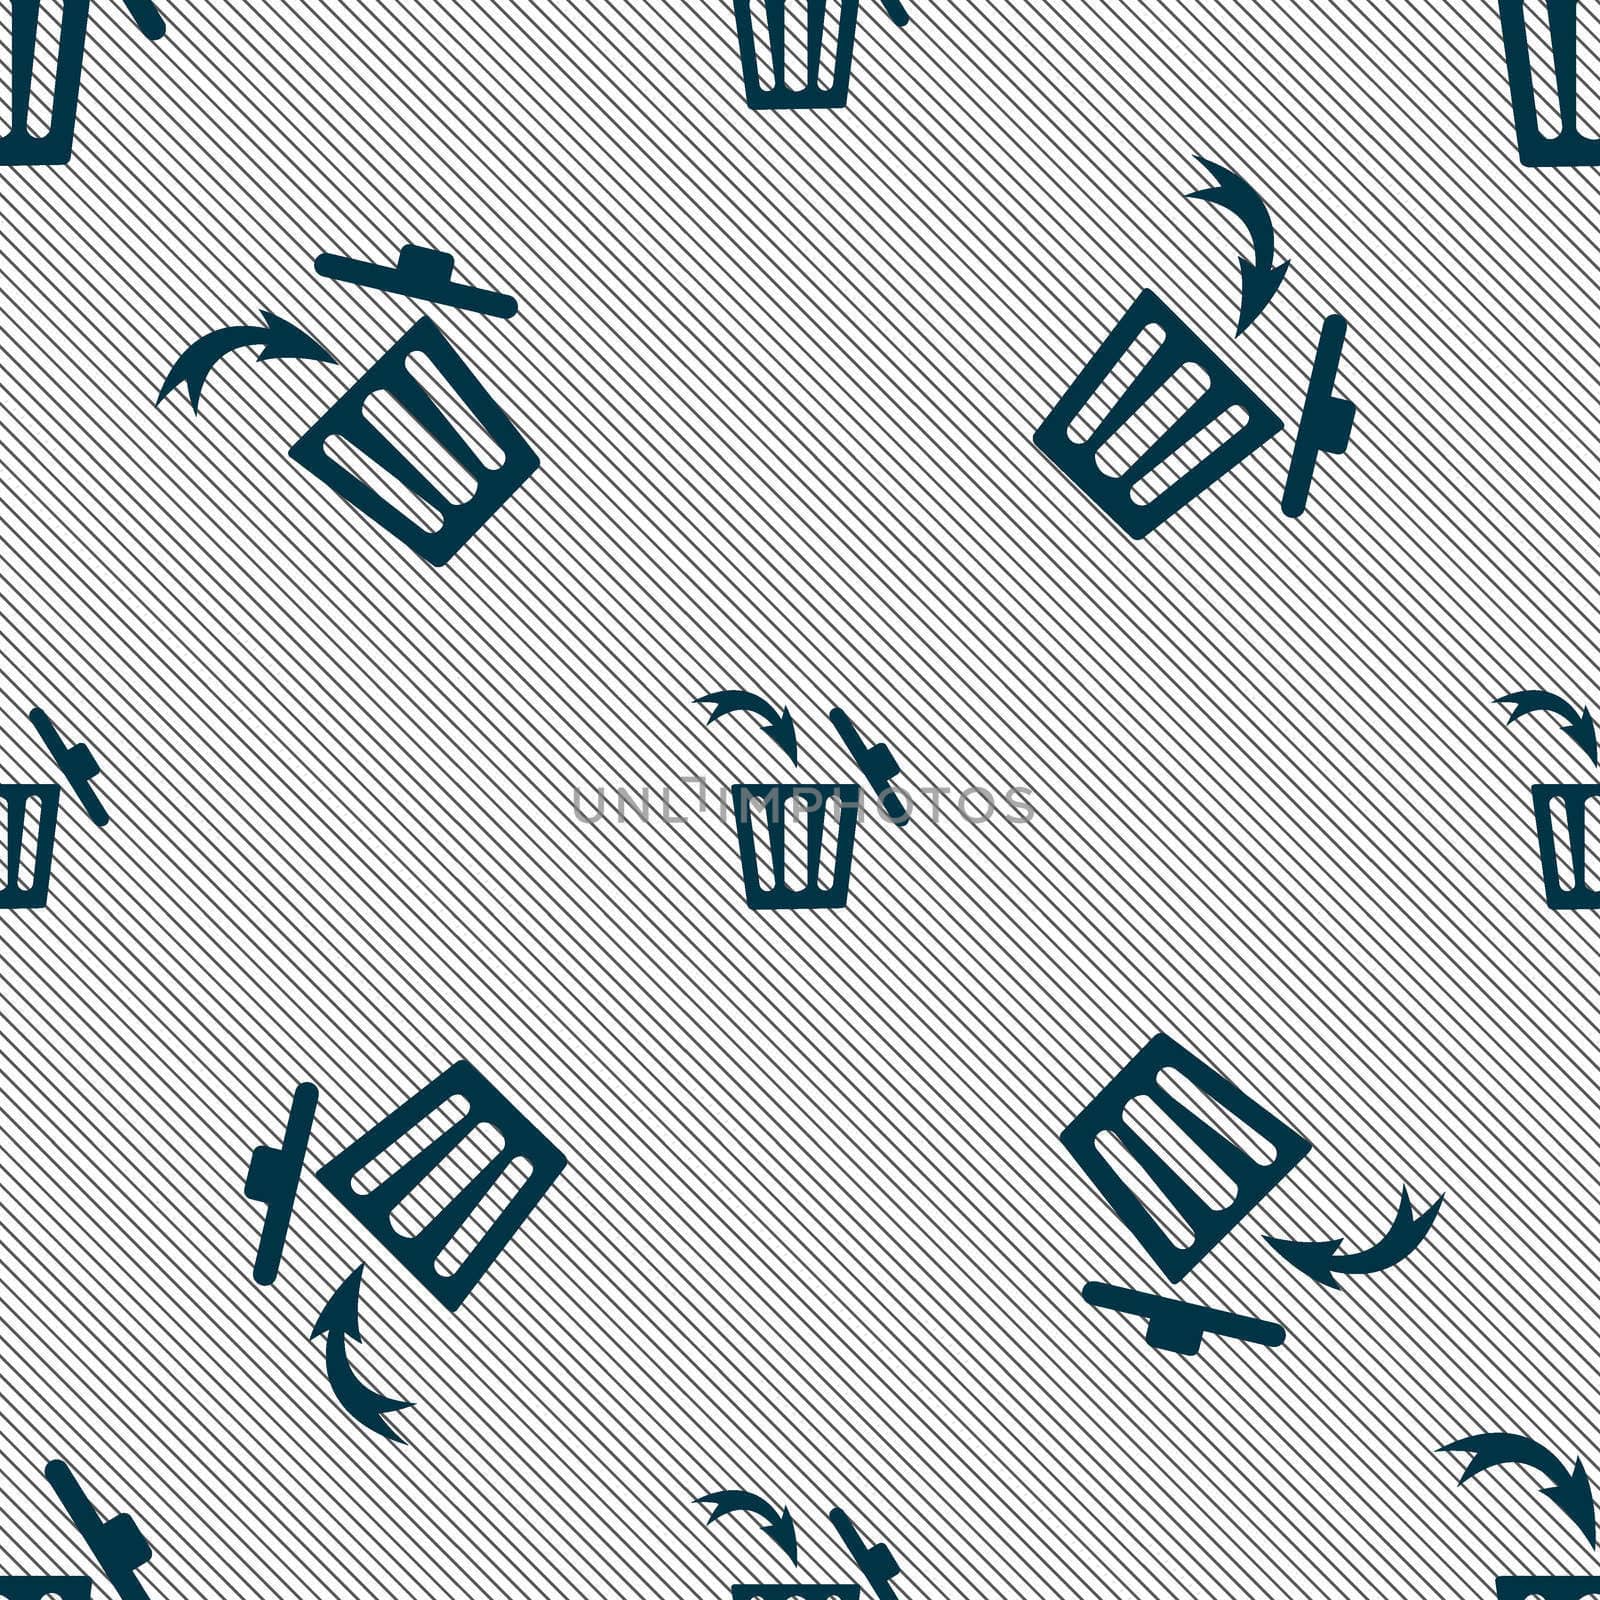 Recycle bin sign icon. Seamless pattern with geometric texture. illustration